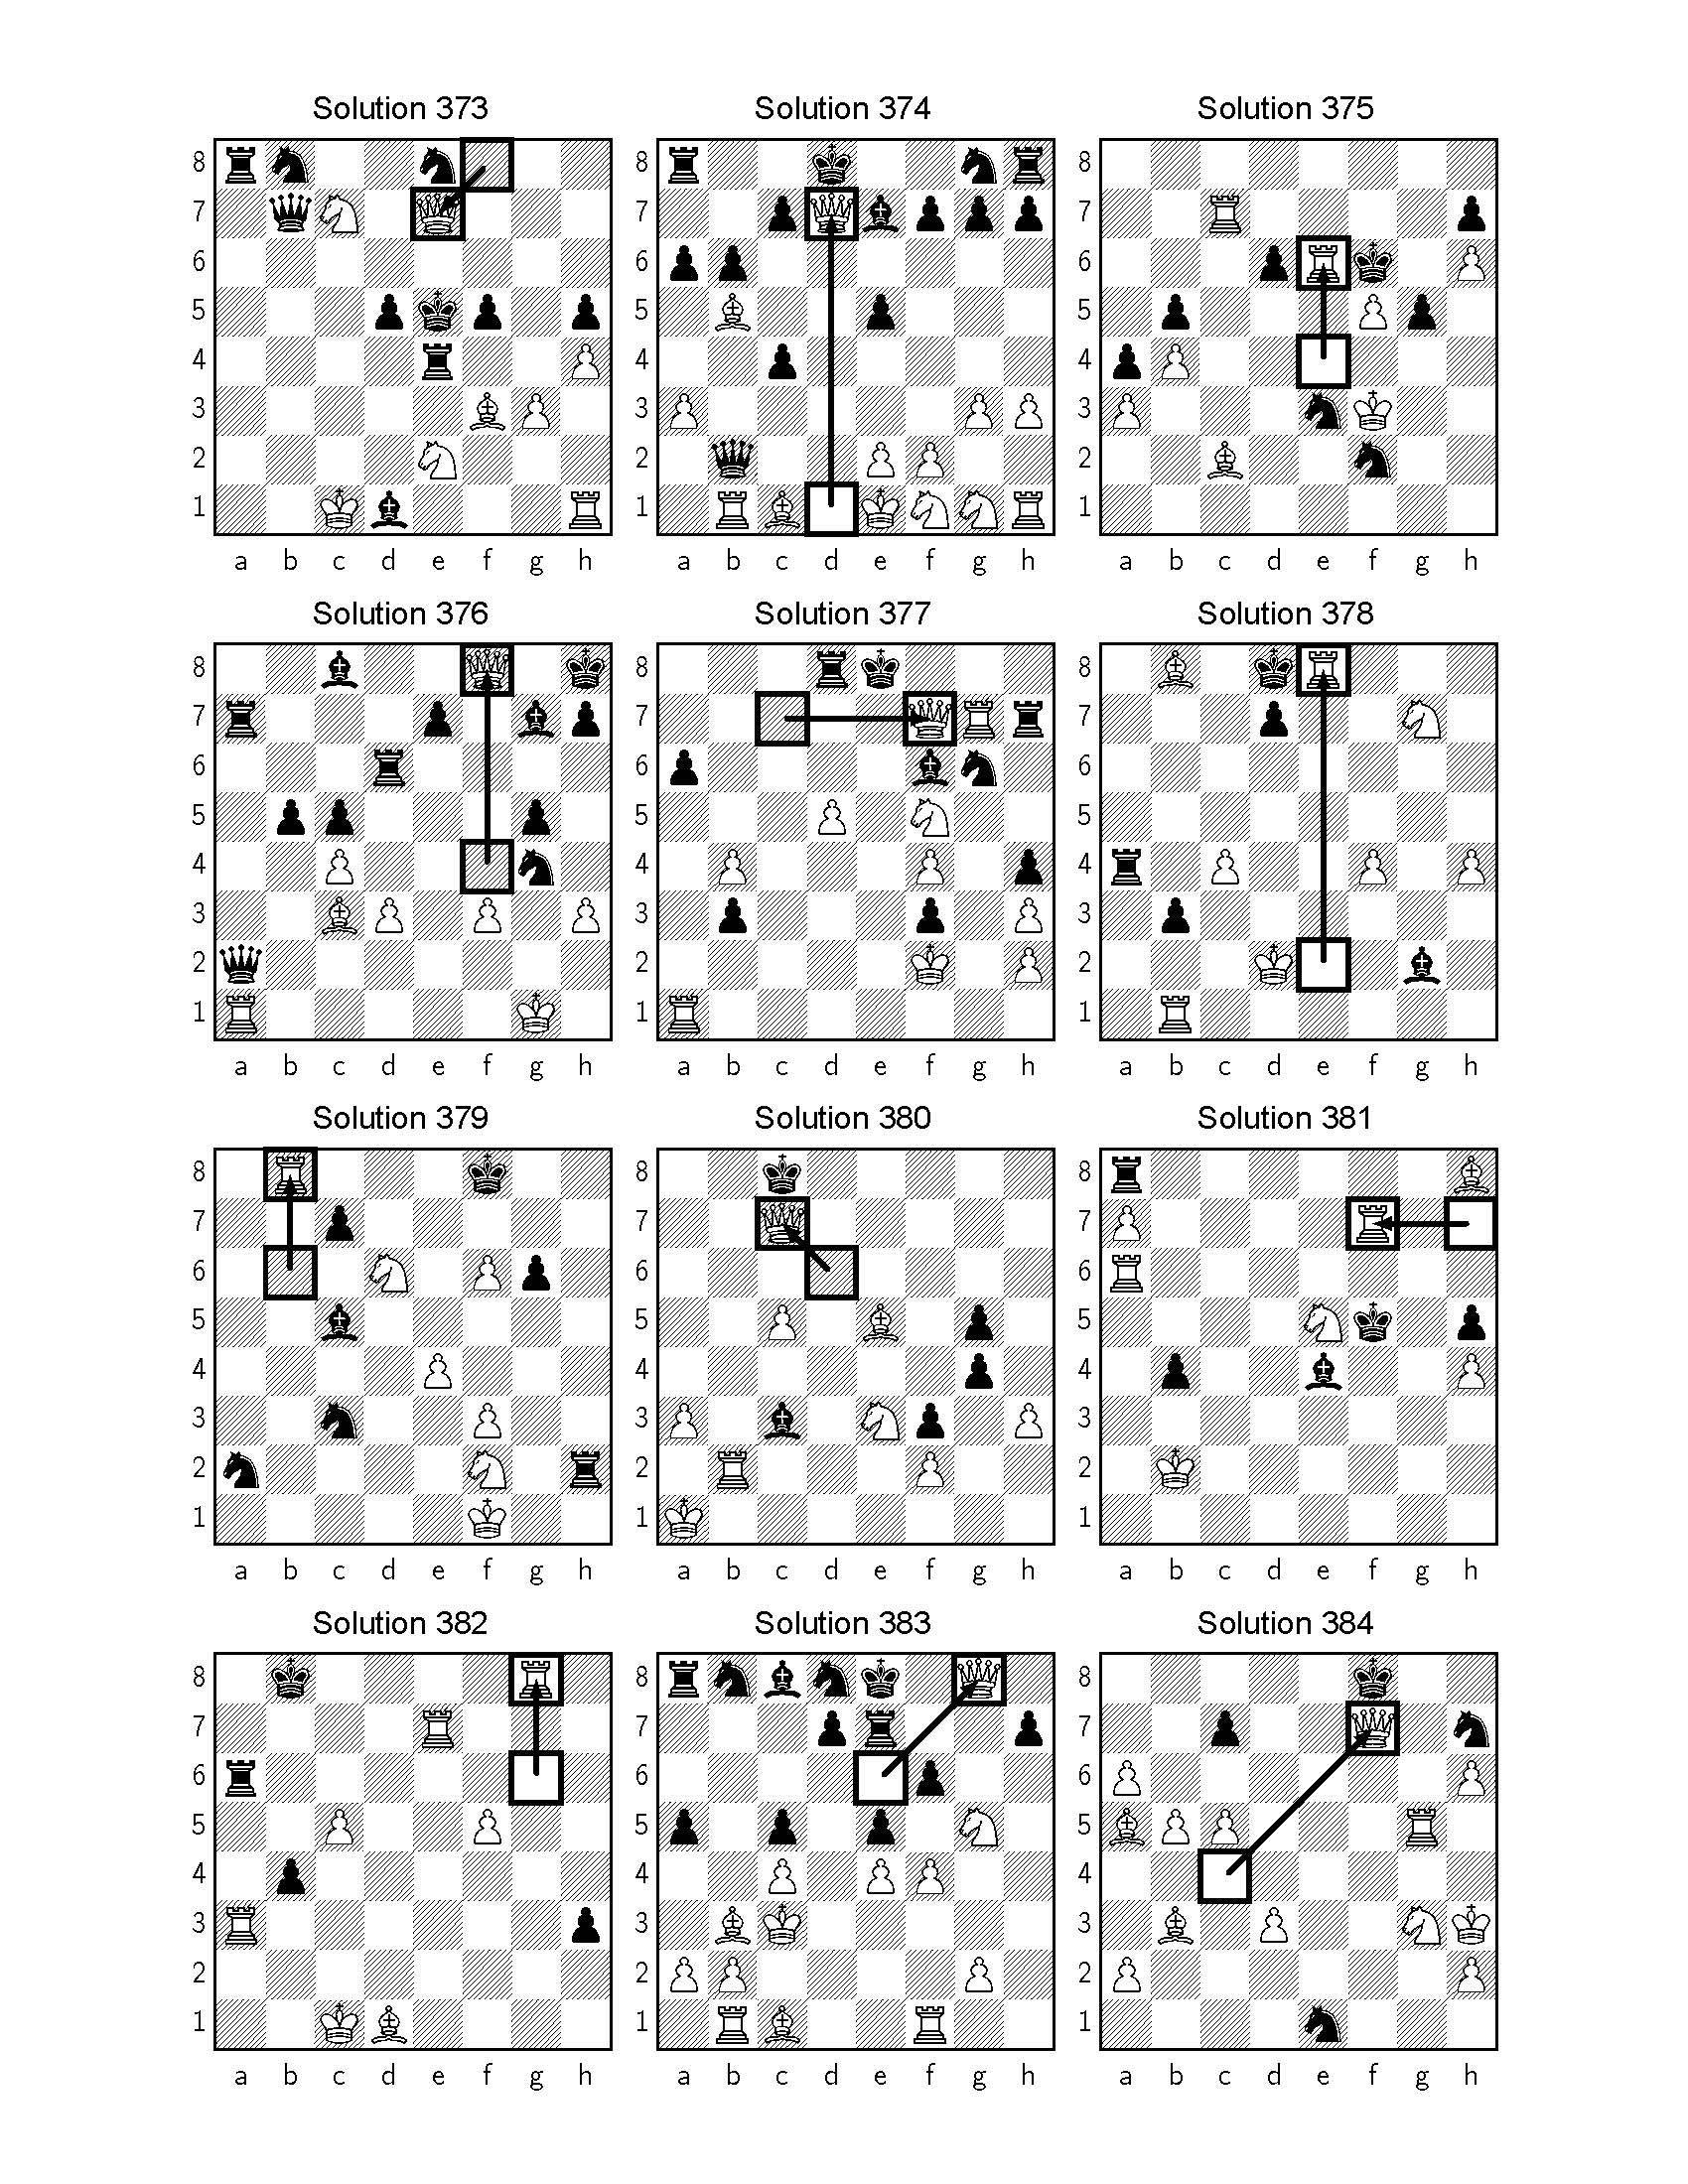 Checkmate in 6-9 Moves : A collection of 444 chess puzzles with solutions